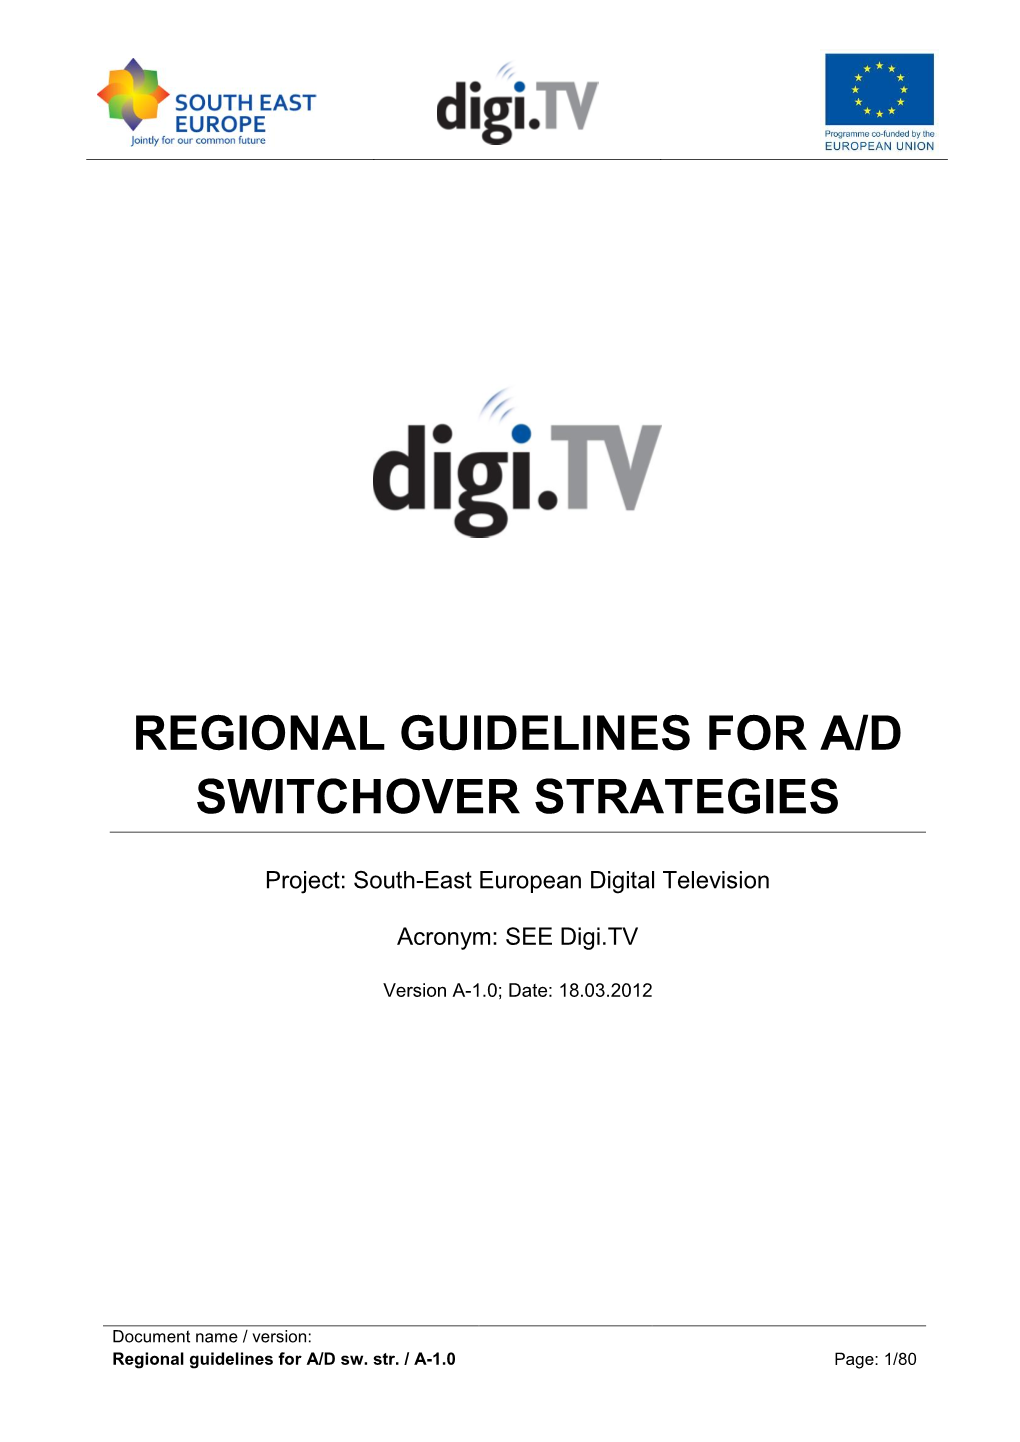 Guidelines for Regional Analogue/Digital Switchover Strategies